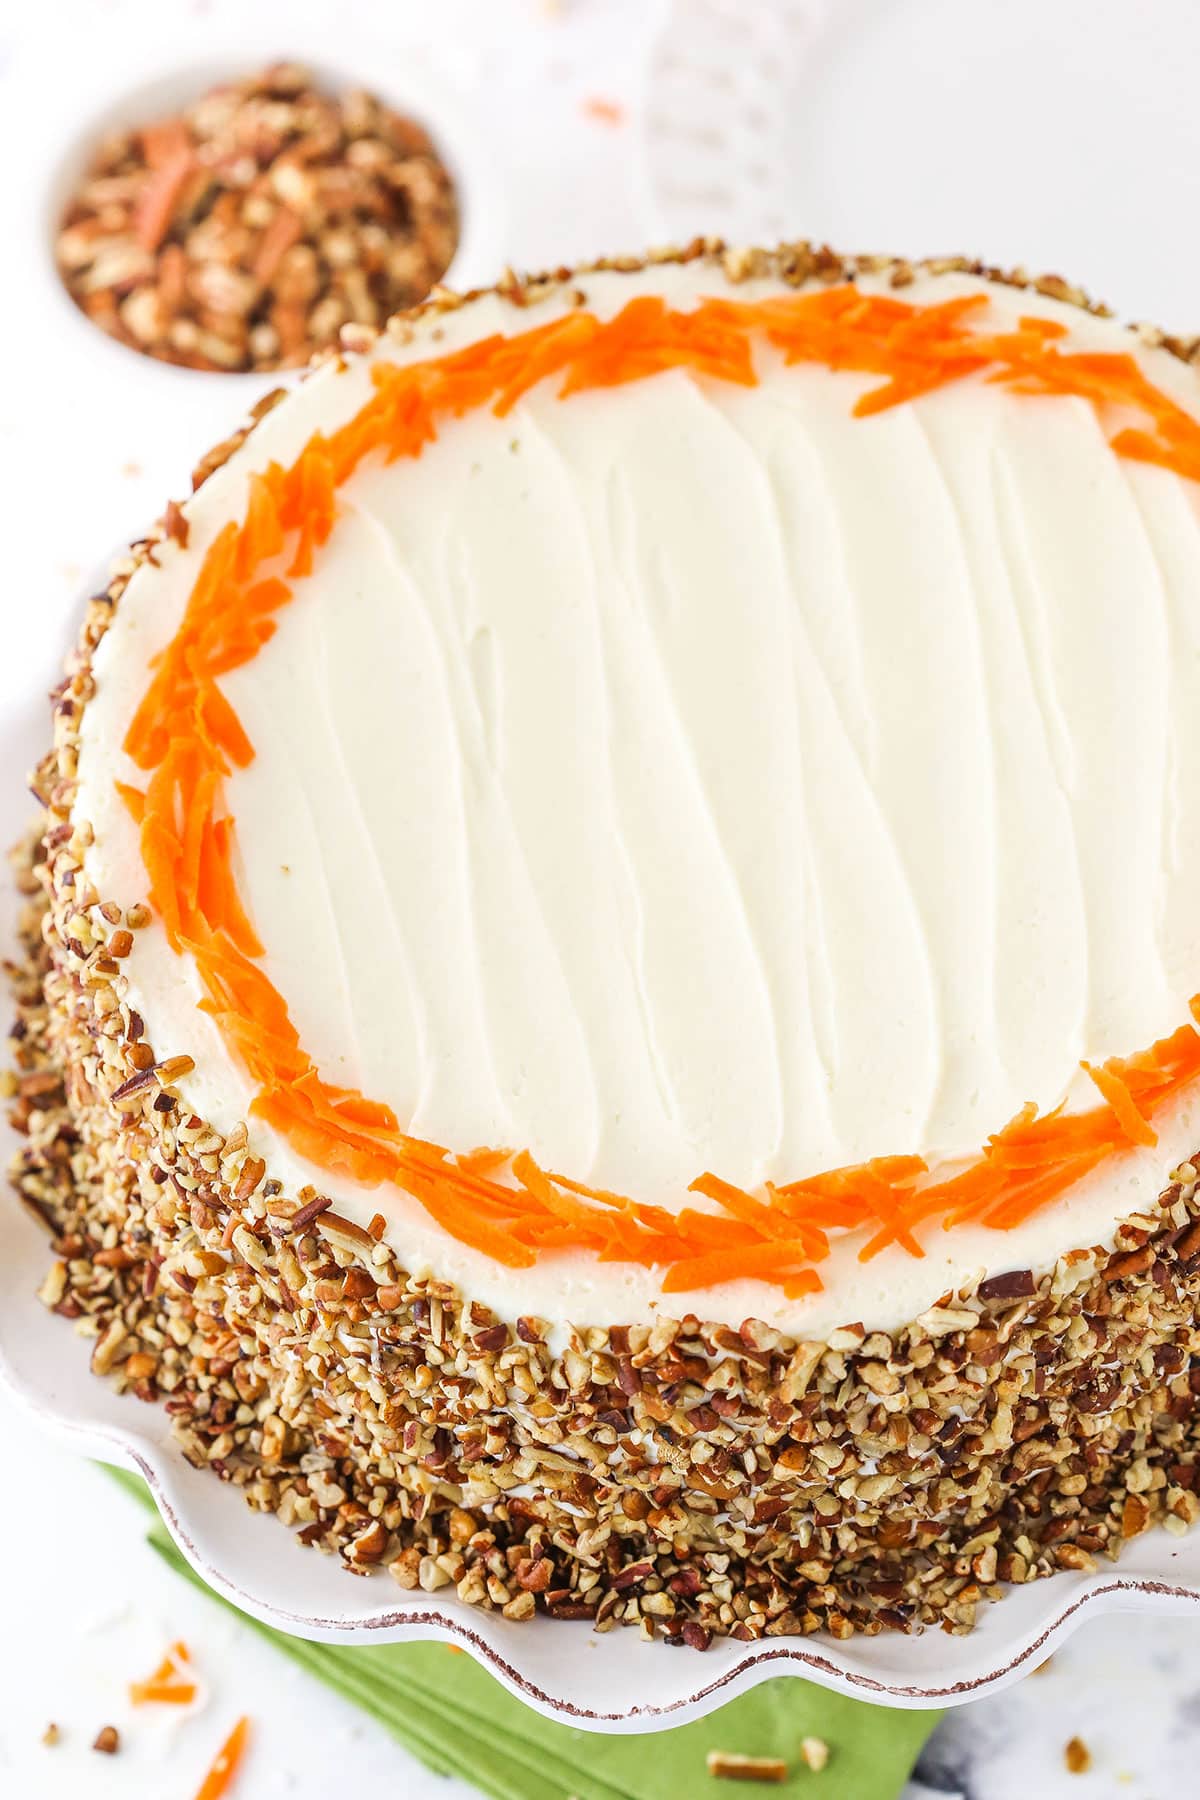 Overhead view of a full Cheesecake Swirl Carrot Cake on a white cake stand